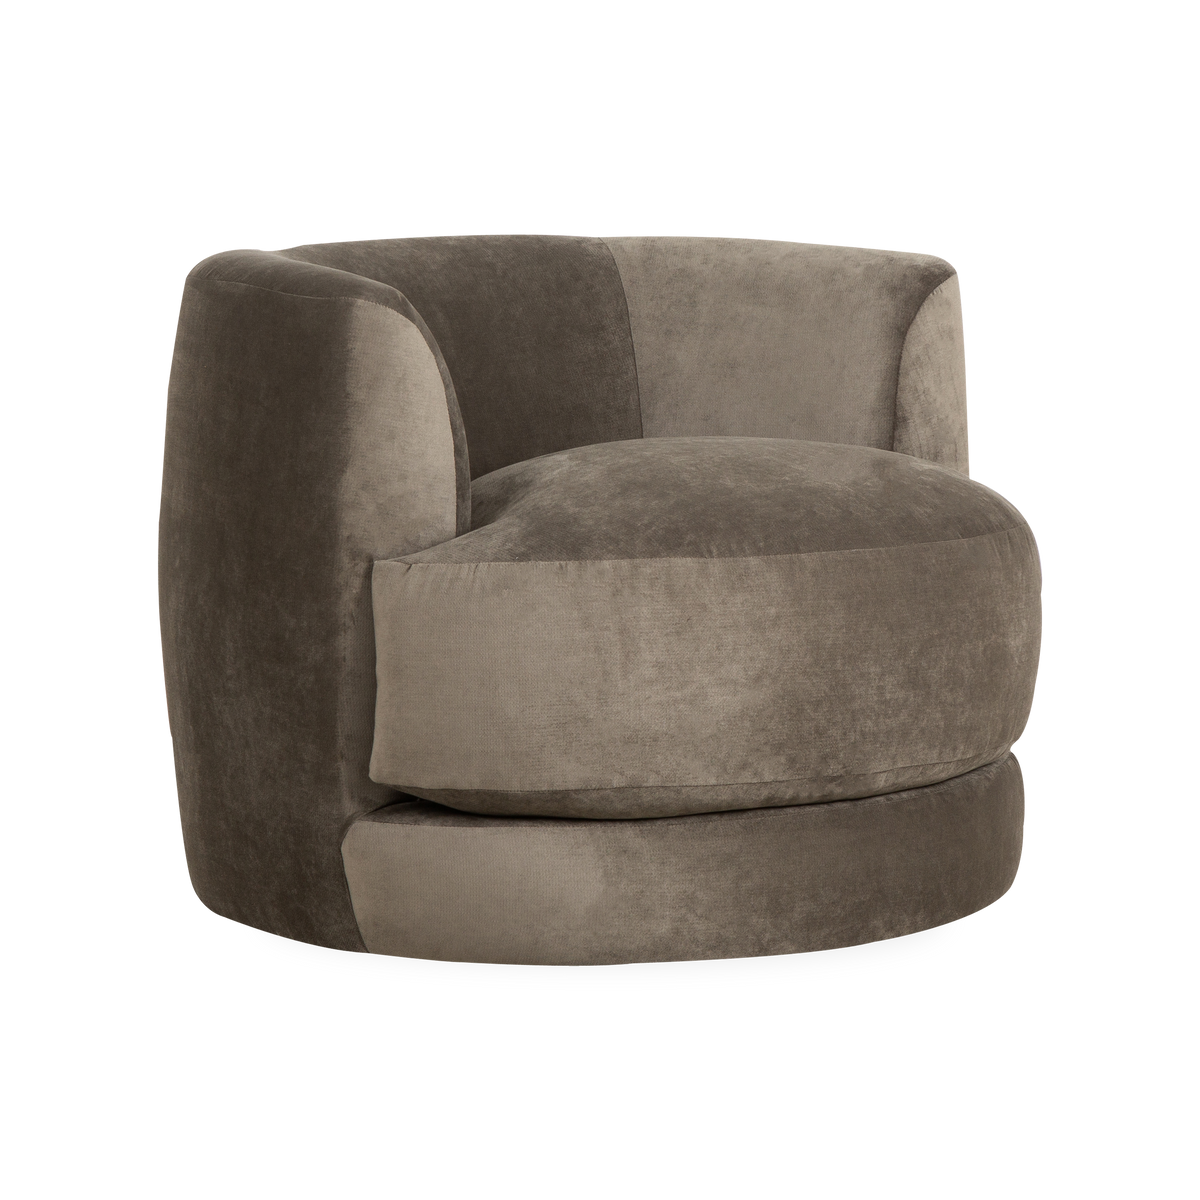 A contemporary club chair, the Brigade Swivel Chair is streamlined with plush curves for a cloud-like design.